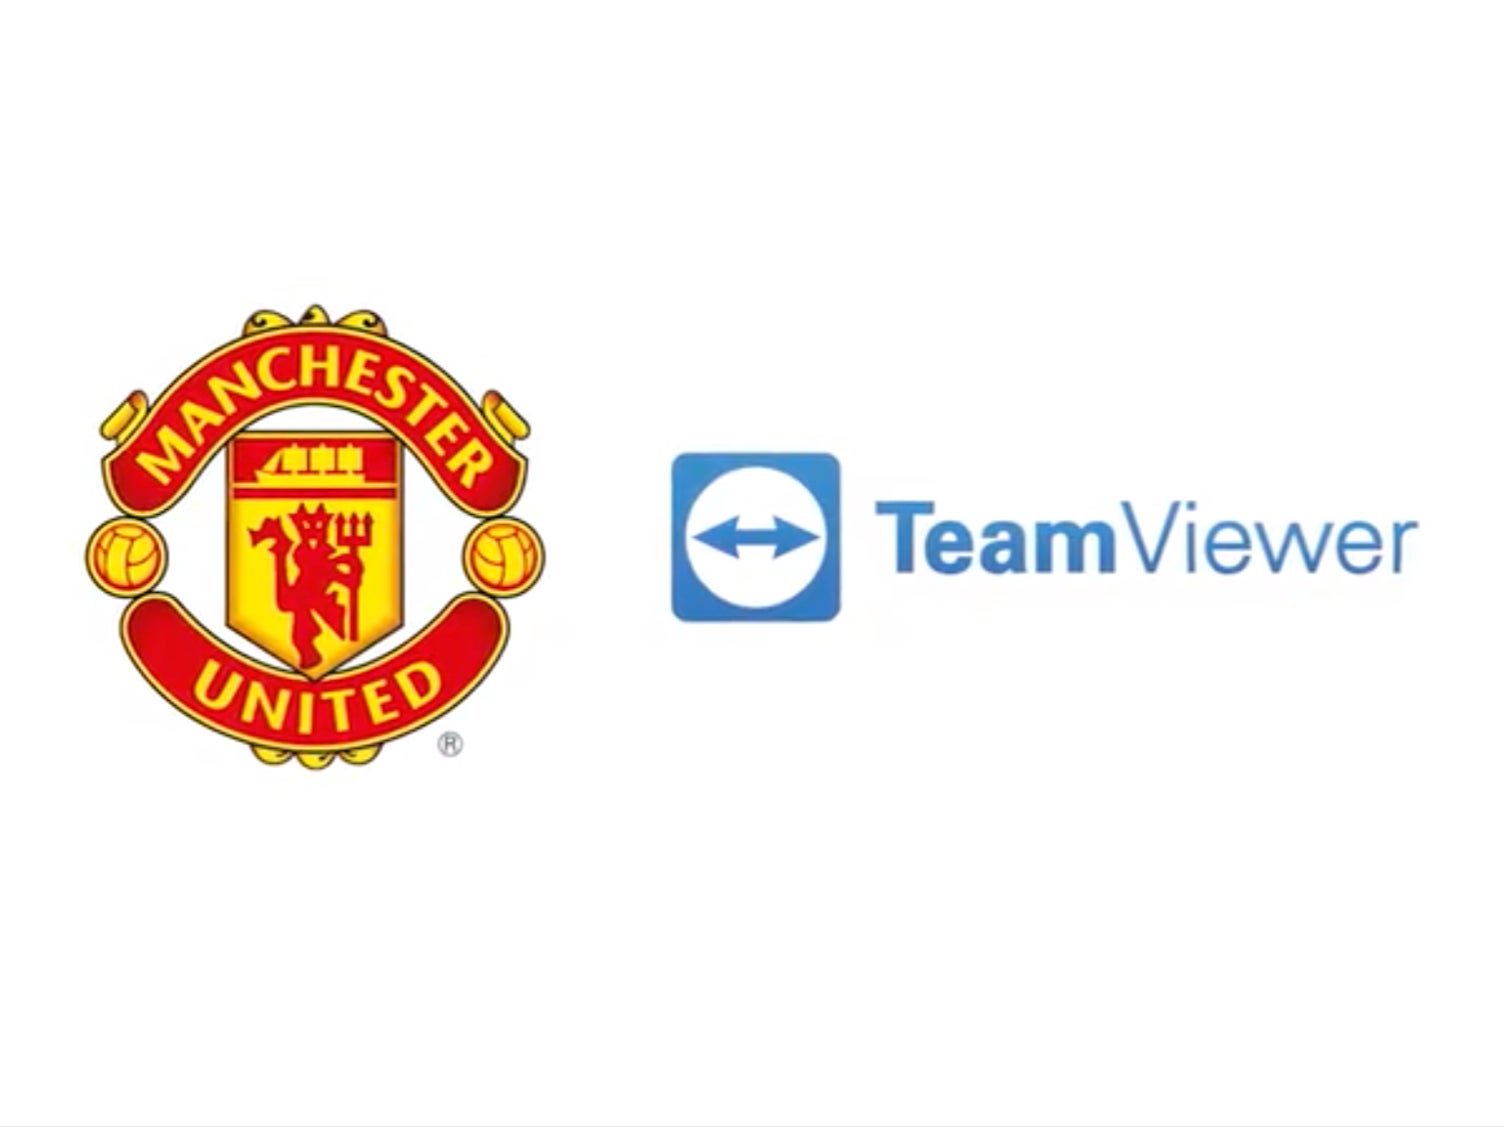 Manchester United have announced a sponsorship deal with TeamViewer